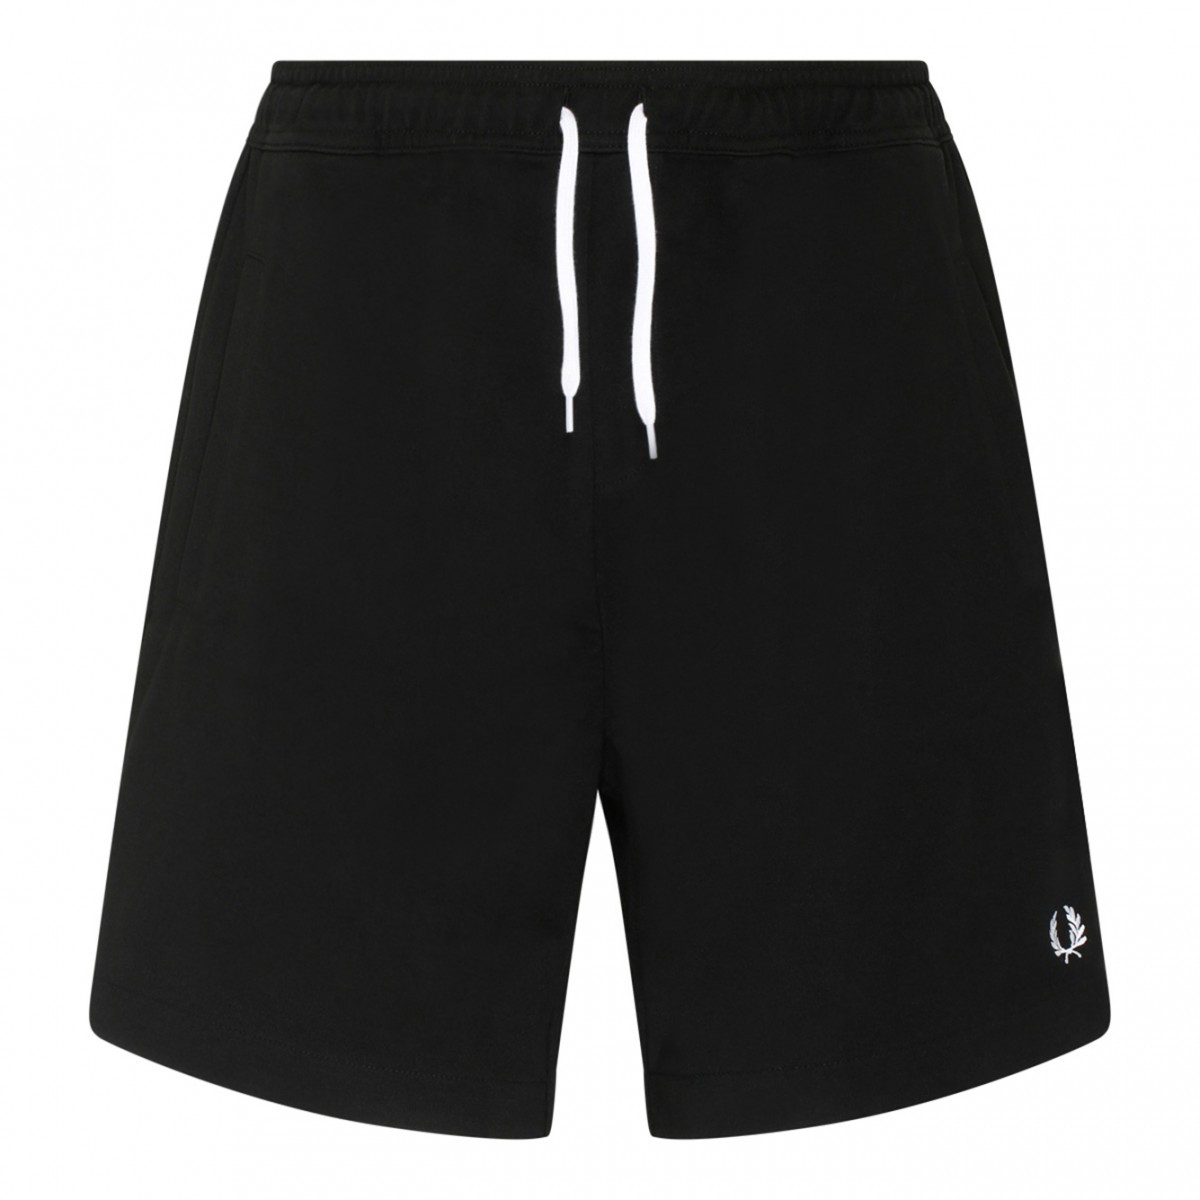 Fred Perry Black Logo Embroidered Shorts.